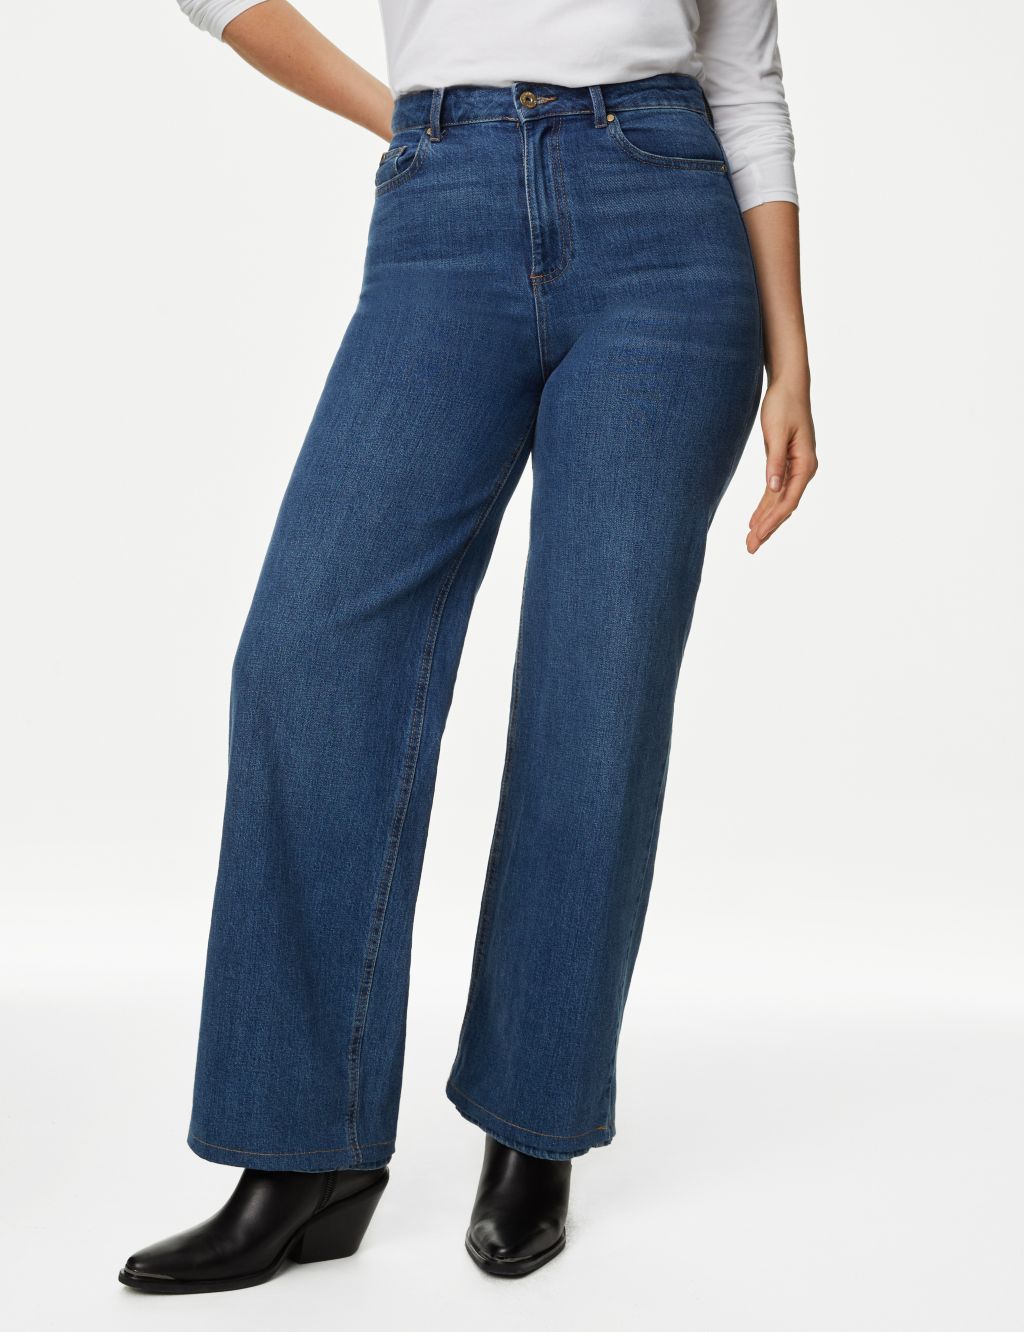 The Wide-Leg Jeans image 5